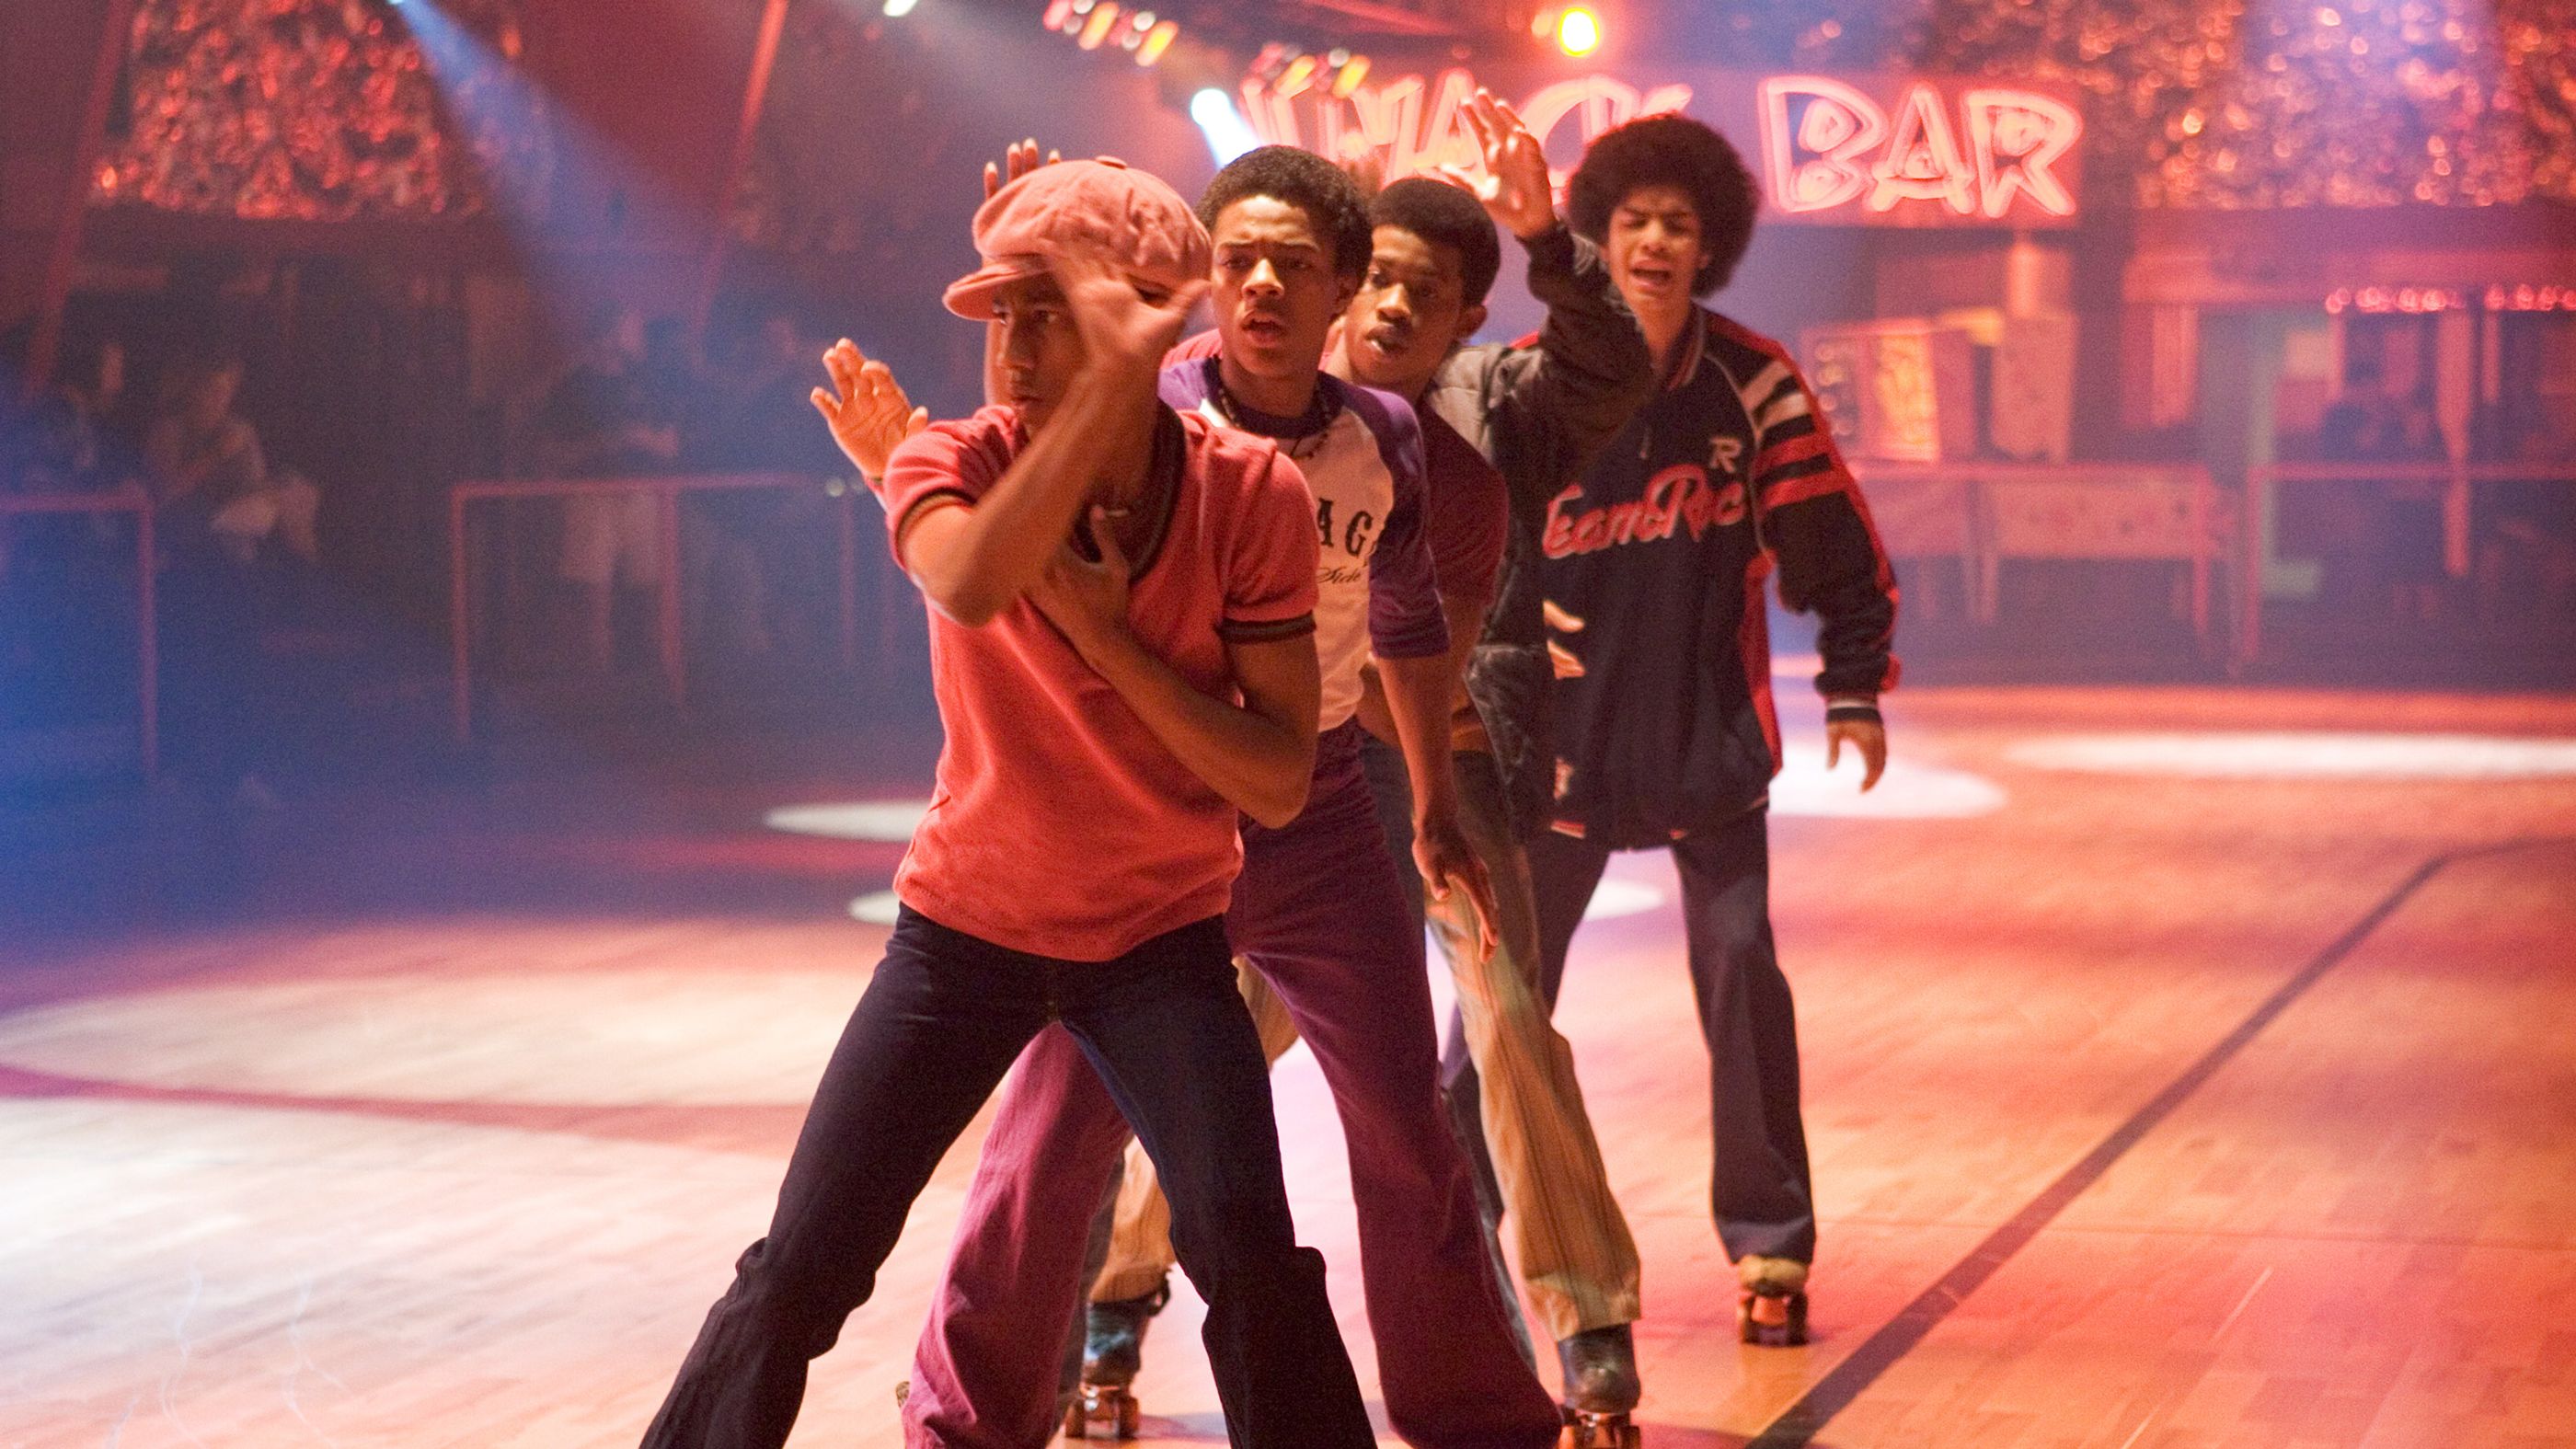 Roll Bounce | Full Movie | Movies Anywhere